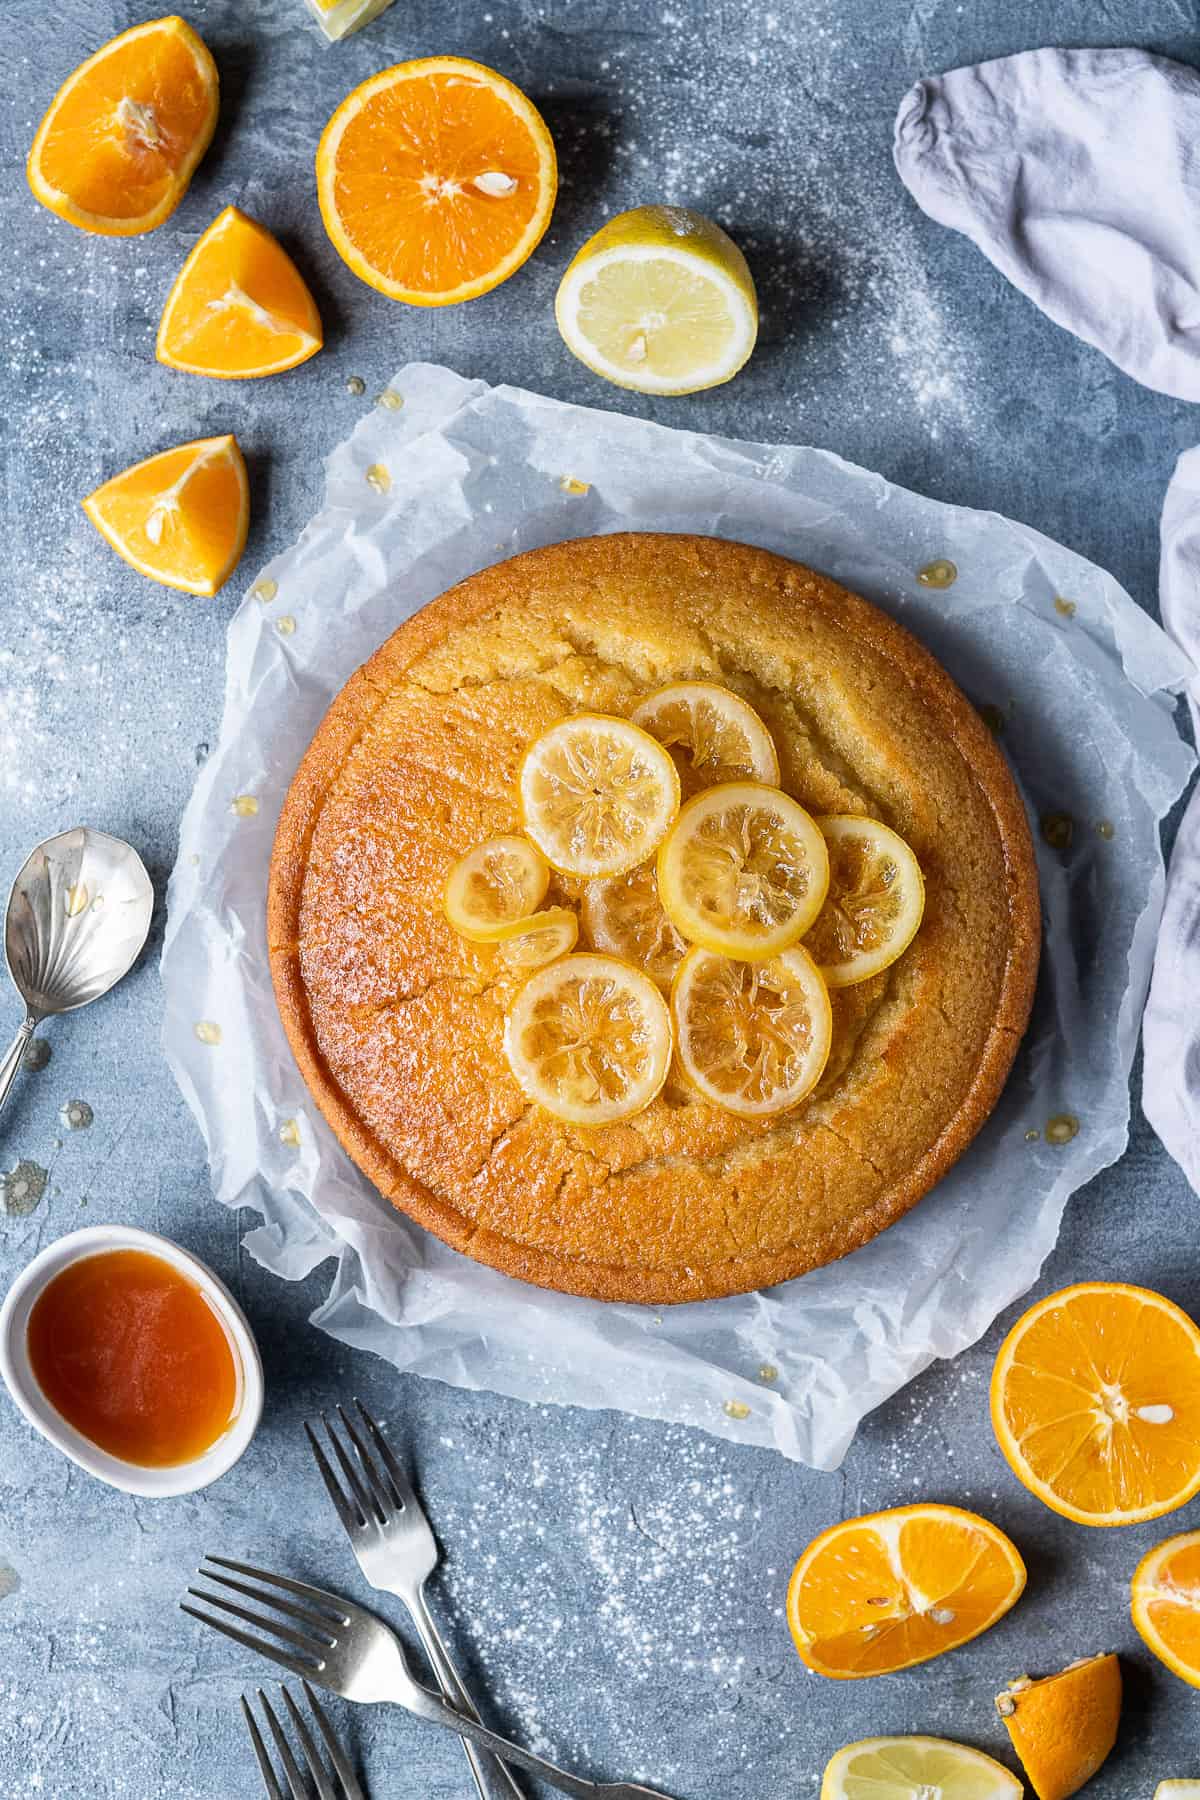 Vegan semolina cake topped with candied lemon slices on a sheet of baking parchment on a grey background with sliced oranges and lemons and three forks.